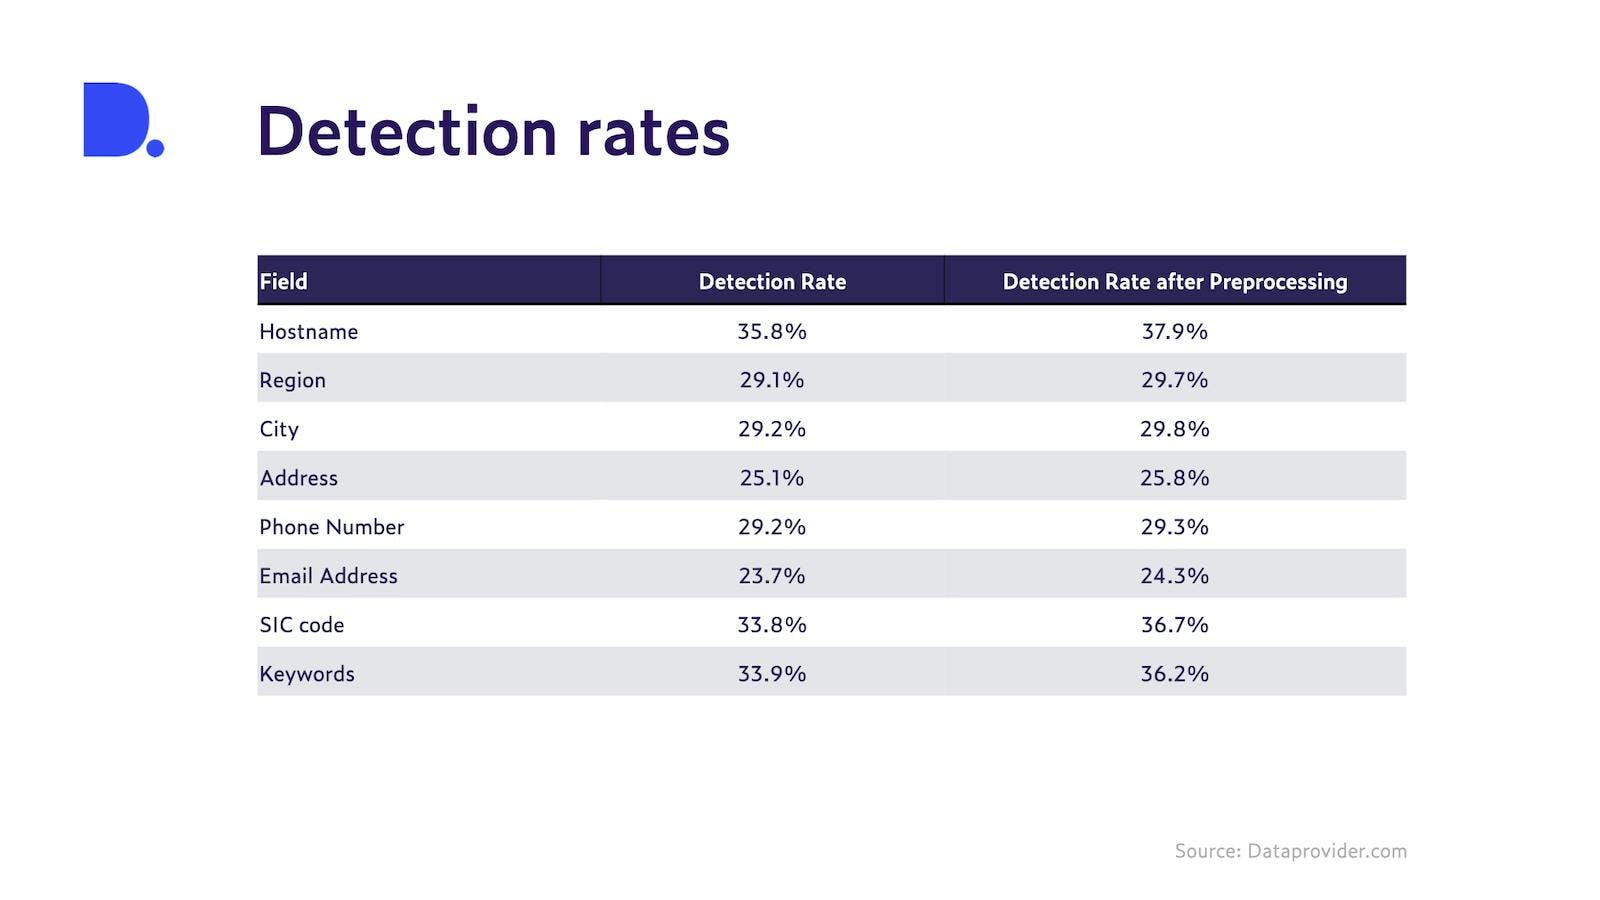 Table listing increase of detection rates: Hostname from 35.82% to 37.85%, Region from 29.11% to 29.71%, City from 29.20% to 29.79%, Address from 25.07% to 25.79%, Phone Number from 29.19% to 29.34%, Email Address from 23.70% to 24.32%, SIC code from 33.83% to 36.70%, Keywords from 33.86% to 36.20%